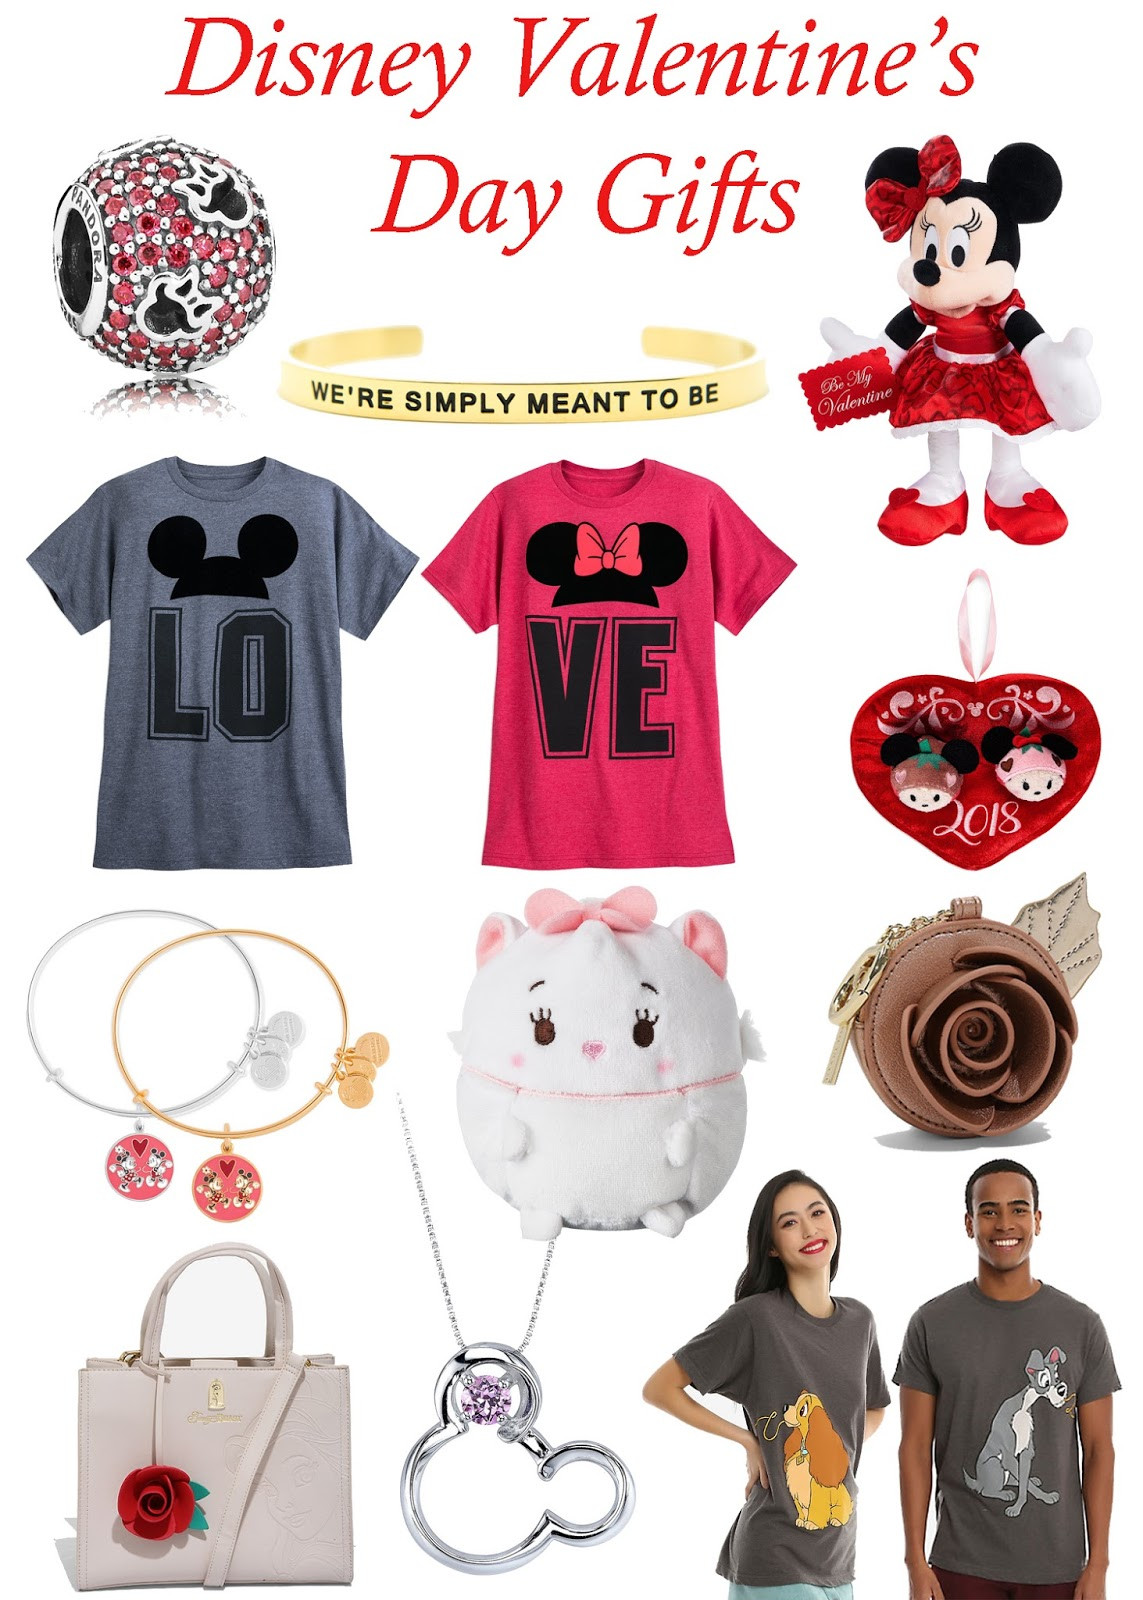 Disney Valentines Day Gifts Luxury Sew Cute Dose Of Disney Disney Valentine S Day Gift Ideas